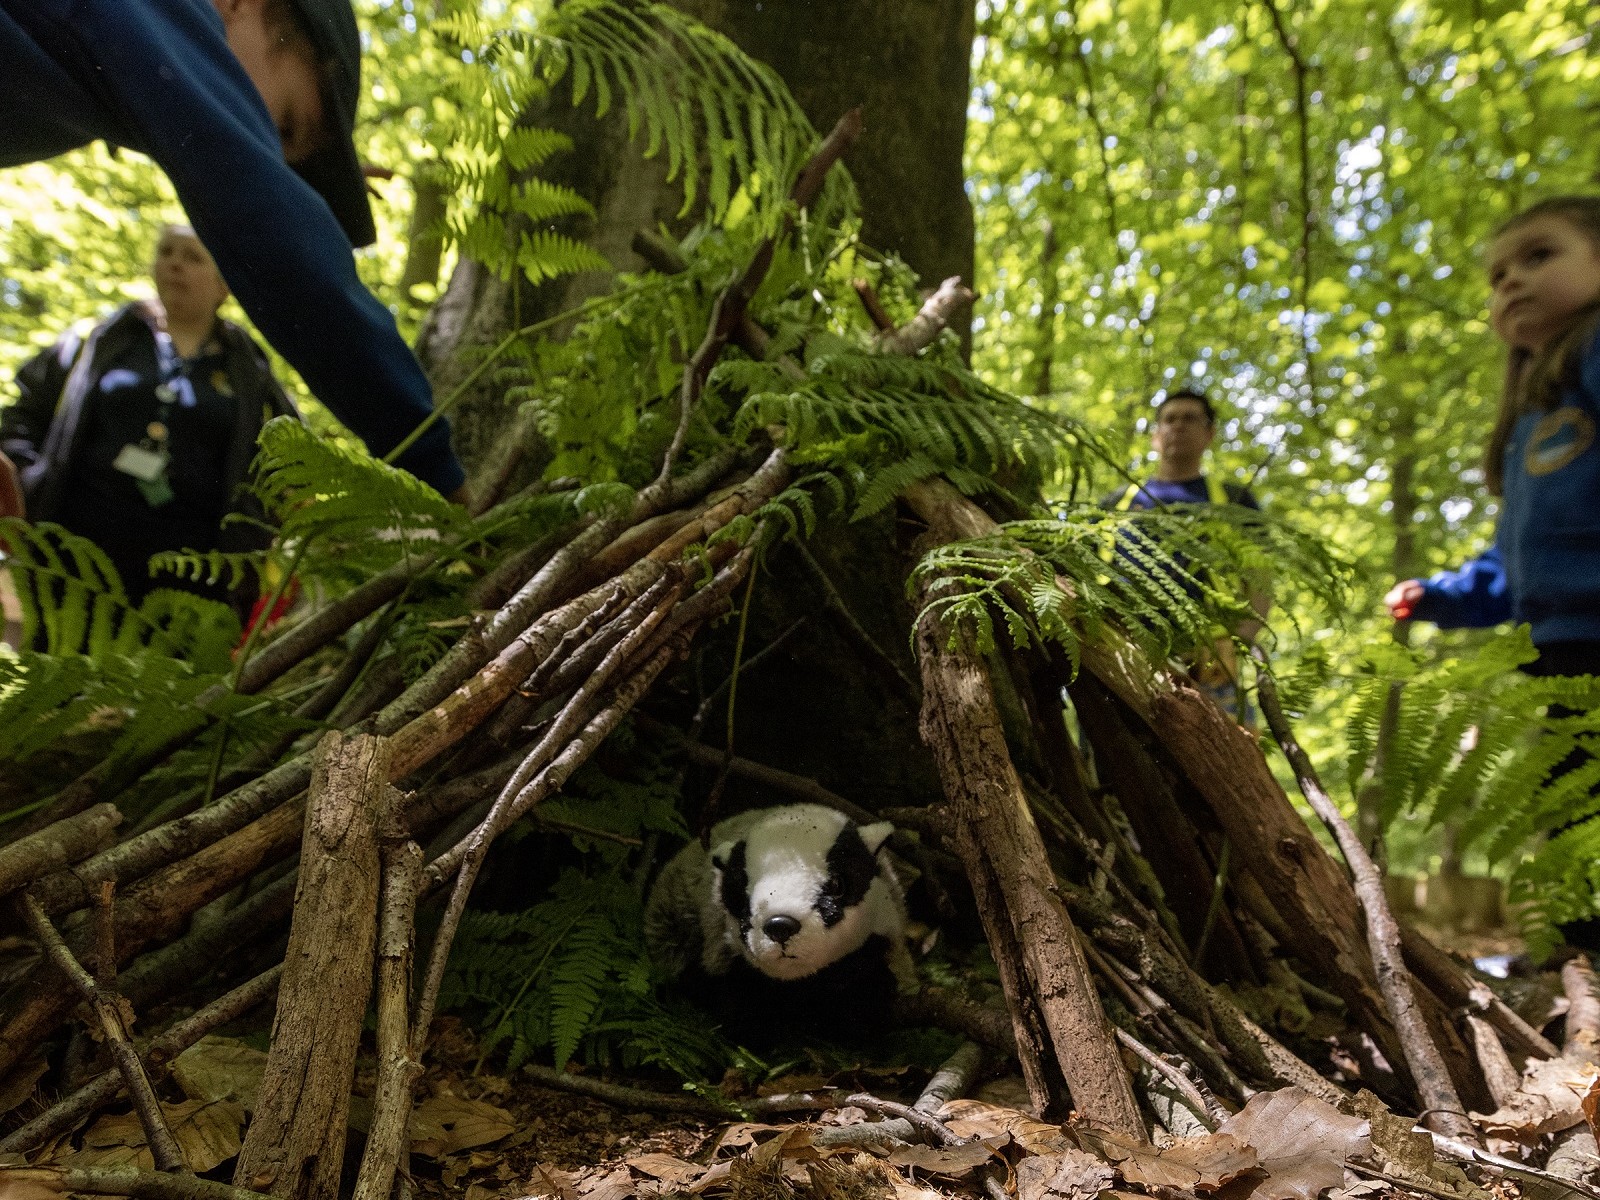 Plush Badger toy hidden in a small den of twigs and green foliage. Young children in the background.